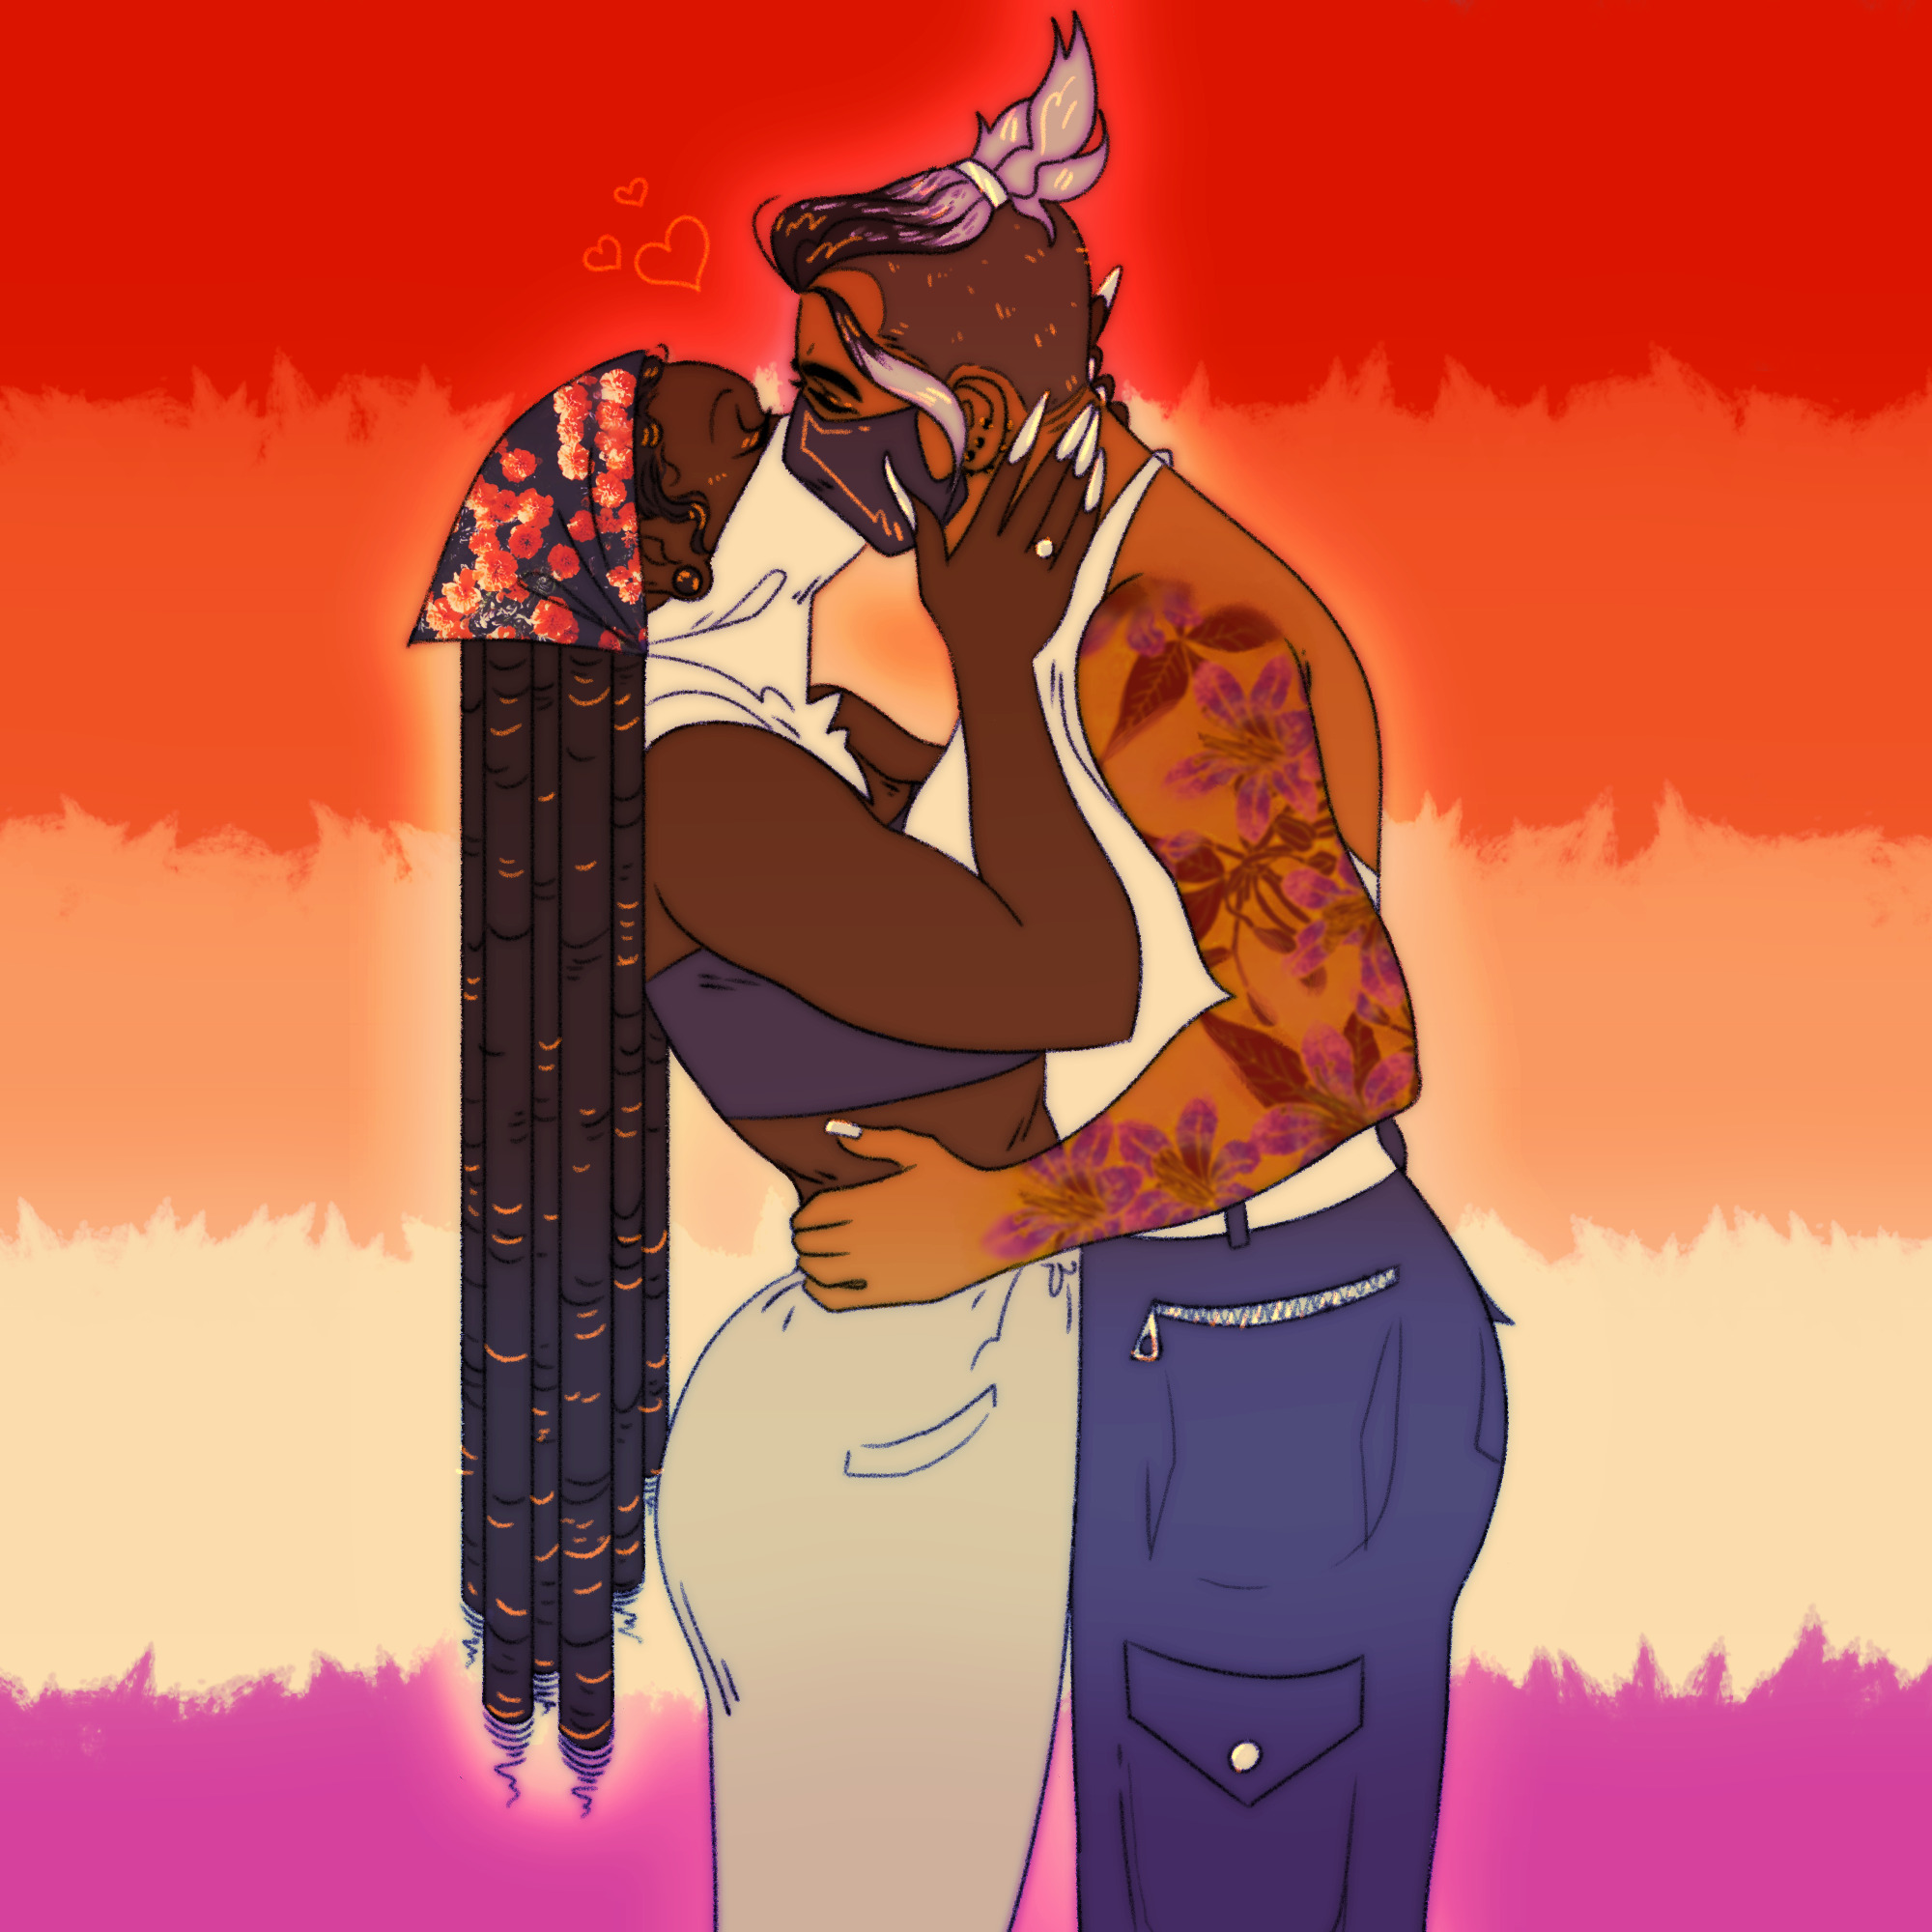 illustration of two women, one femme and one stud, kissing each other. the background is the lesbian flag